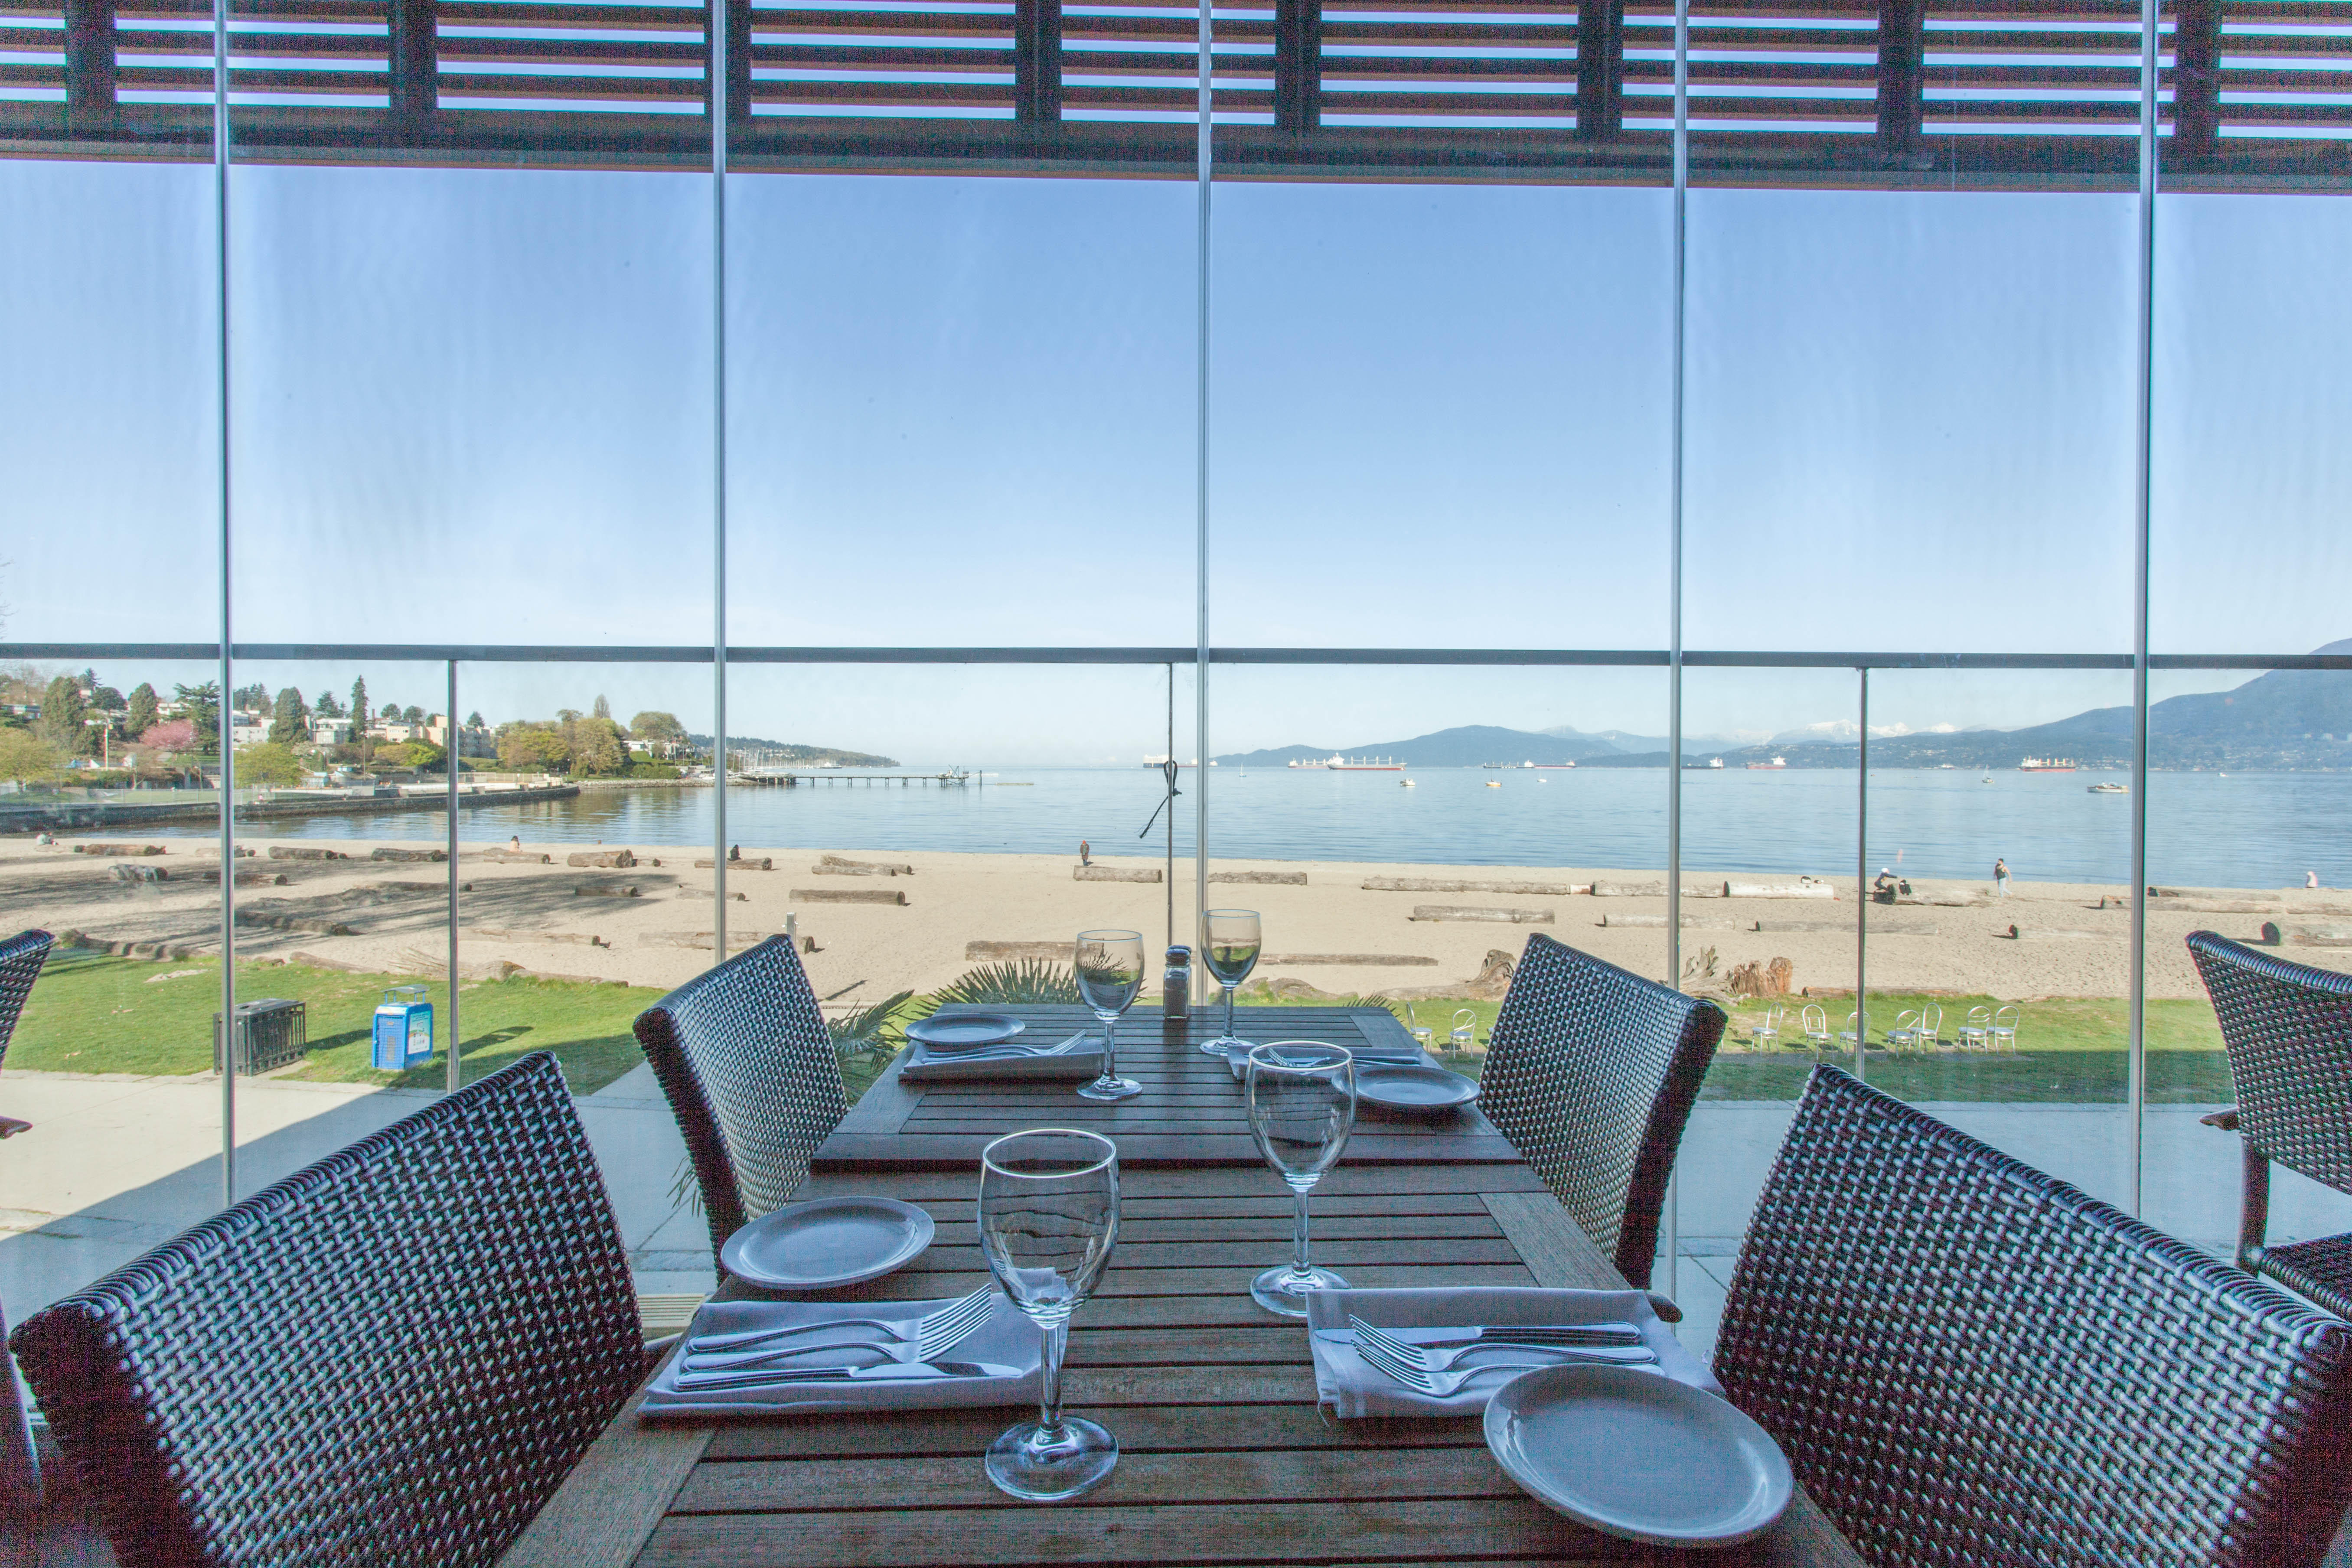 The Boathouse Restaurant Vancouver (604)738-5487